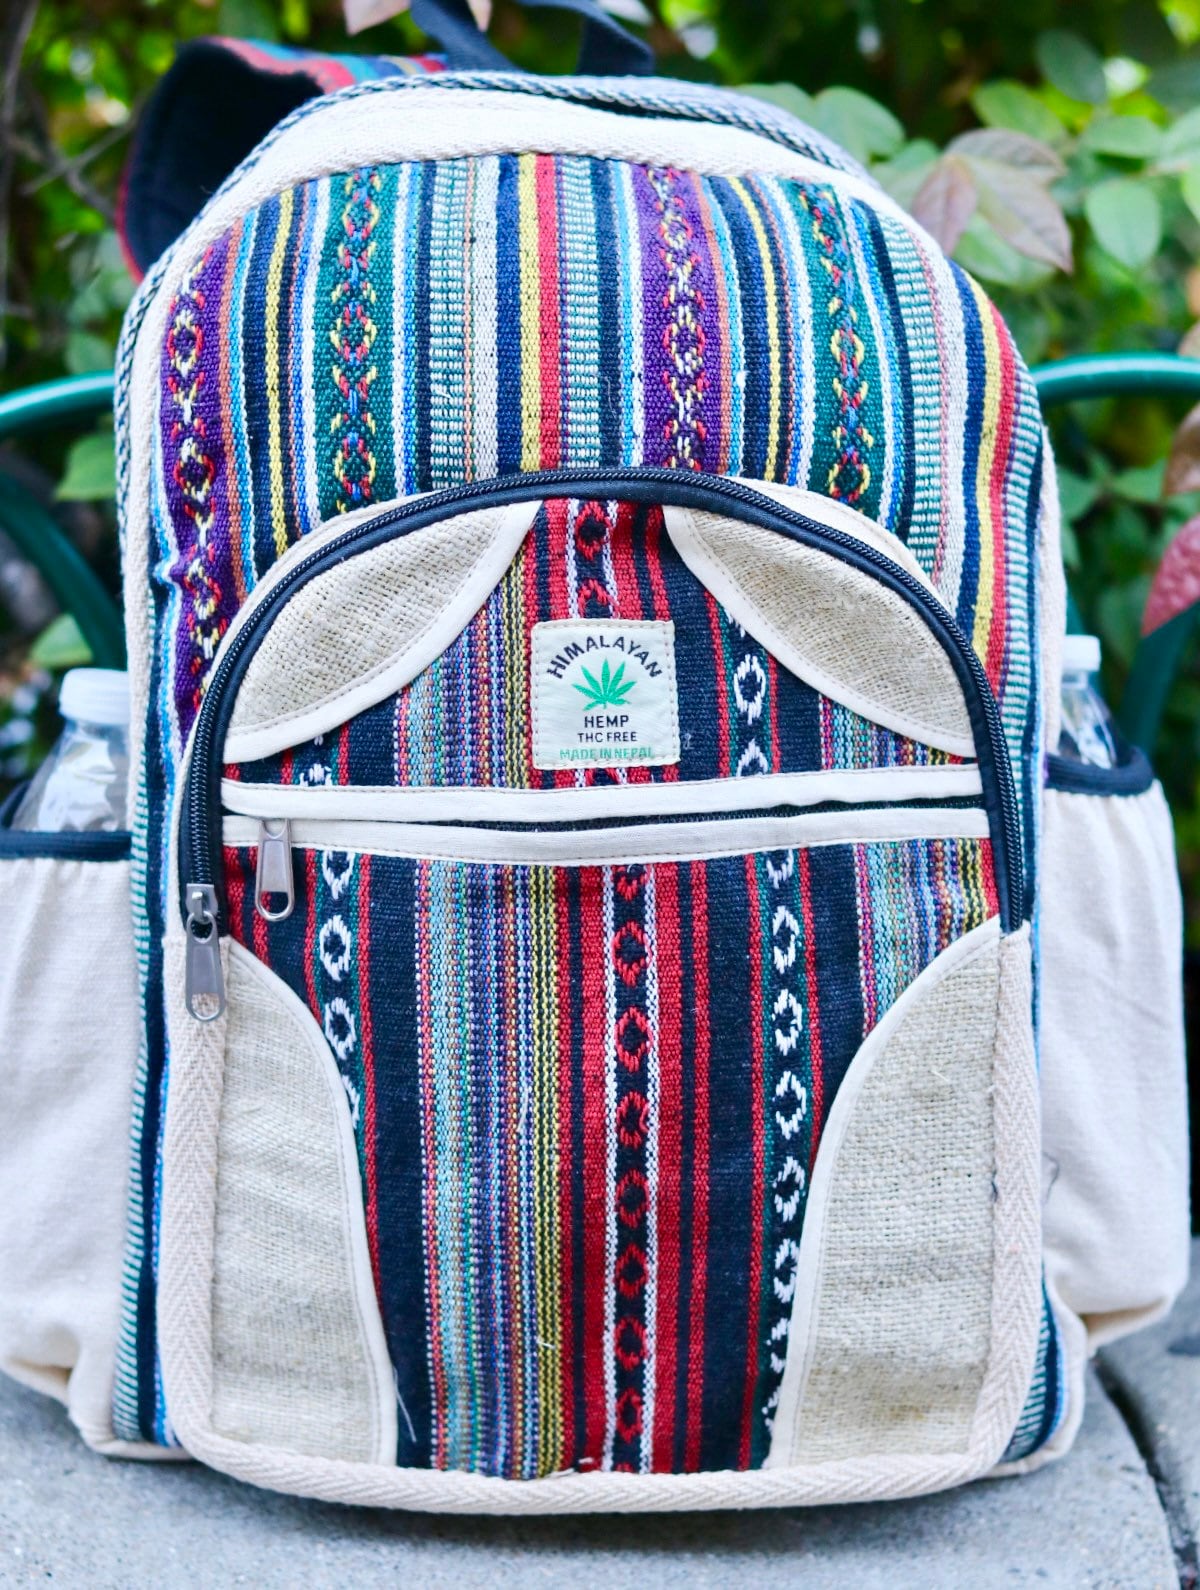 Hemp Backpack | Eco-Friendly High Quality Hemp and Cotton Mixed Made in Nepal Rucksack Backpack for Men and Women